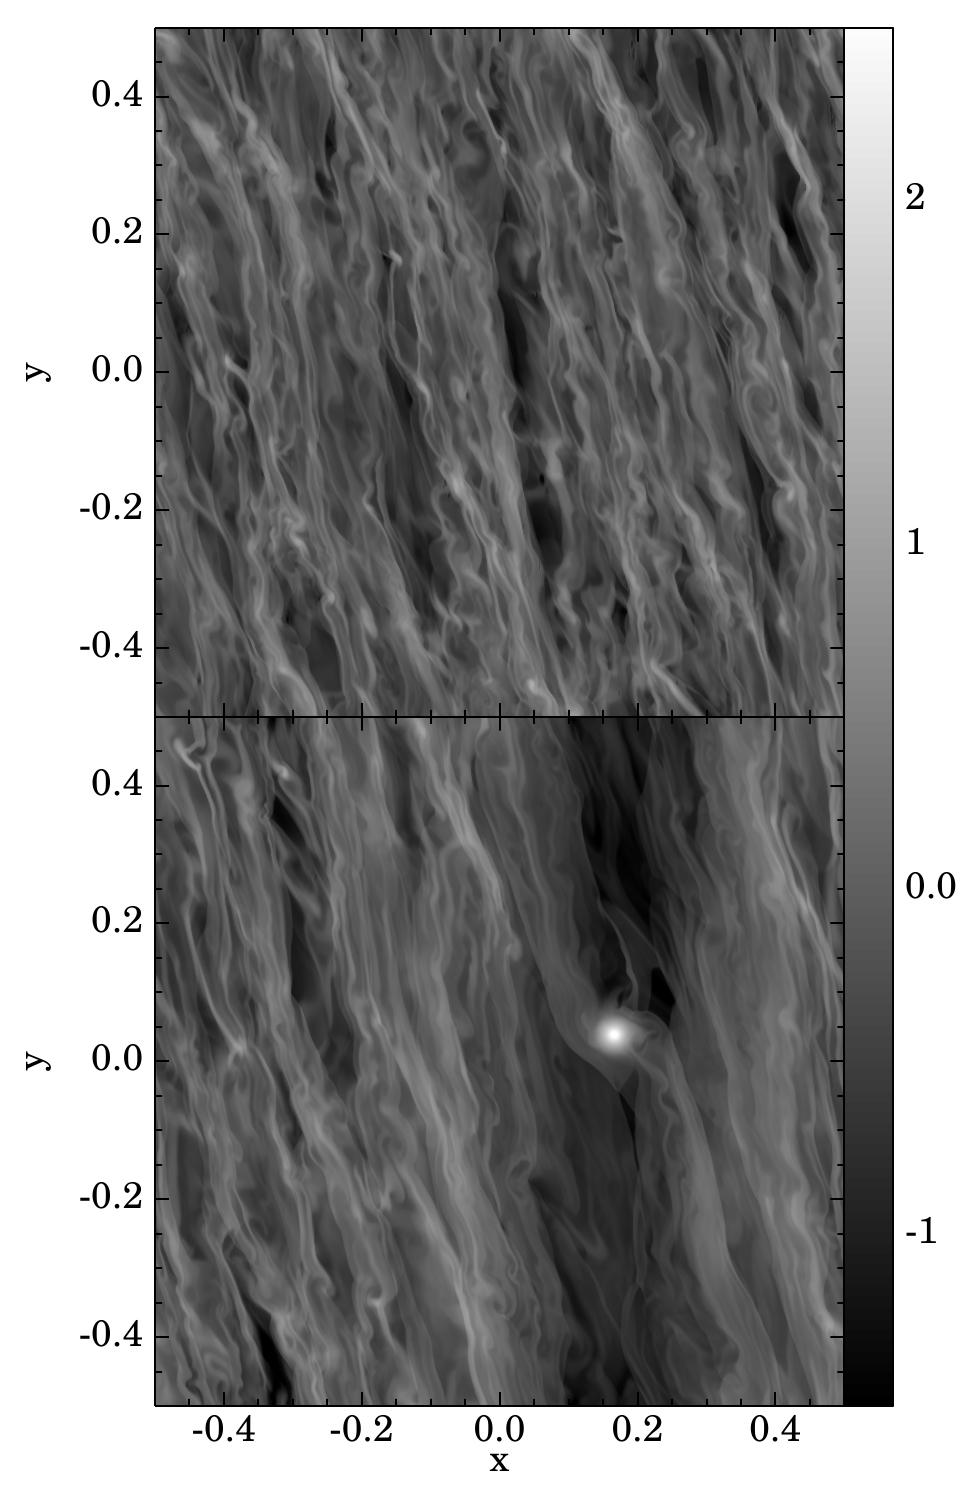 When do (simulated) protostellar discs fragment?